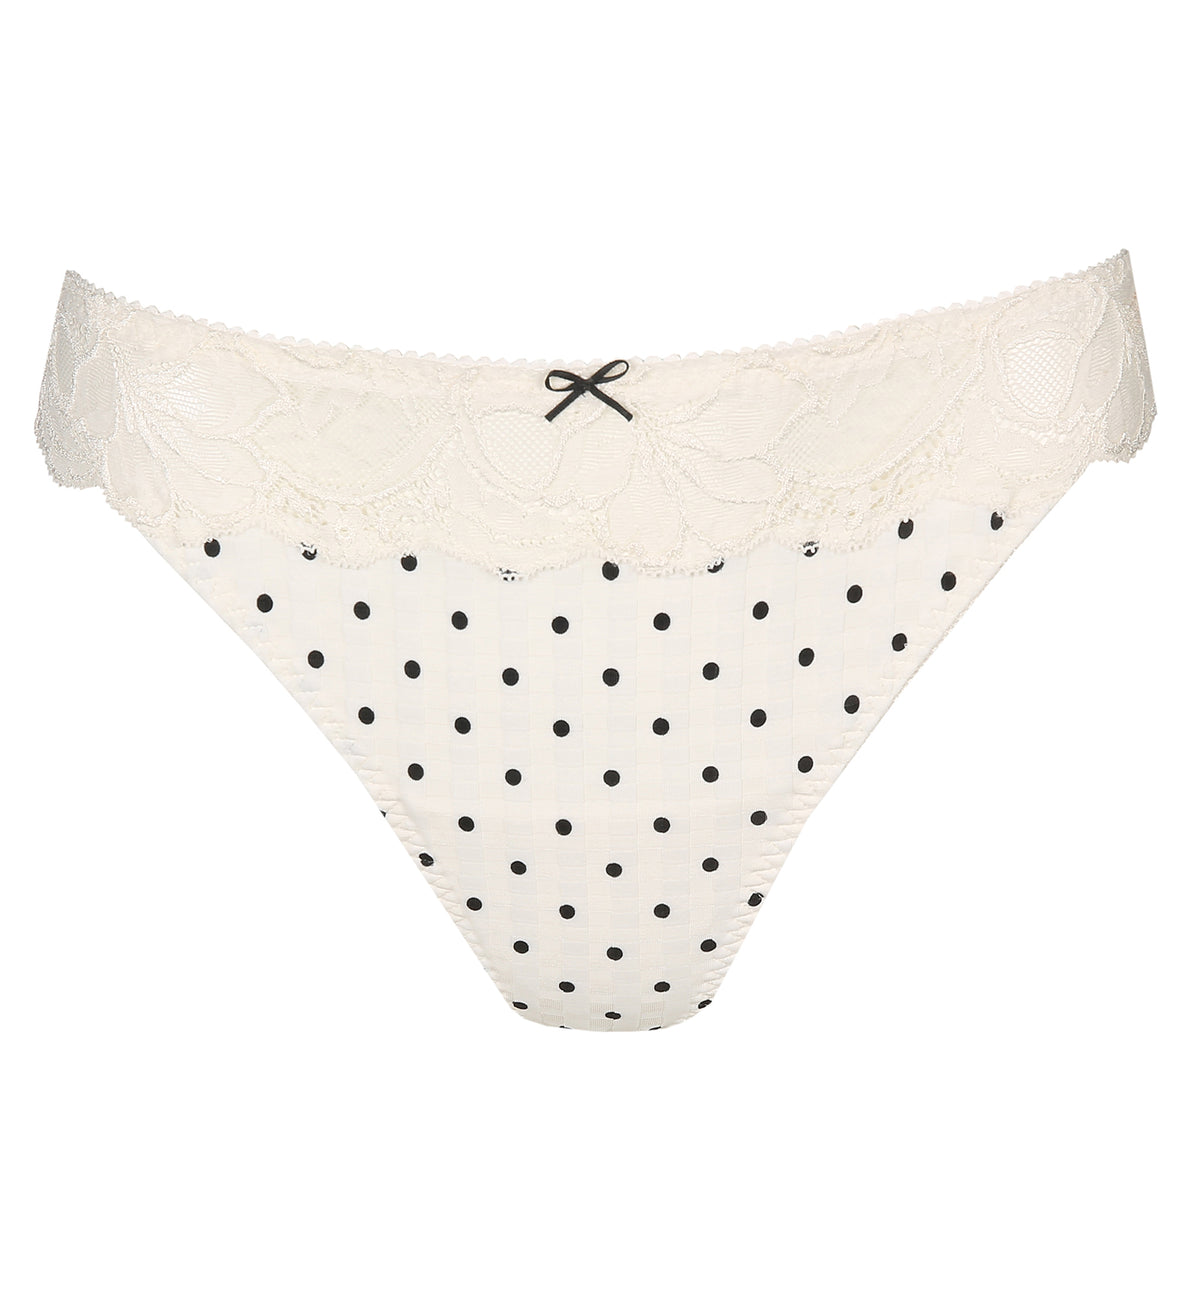 PrimaDonna Madison Matching Thong (0662125),Small,Coco Classic - Coco Classic,Small